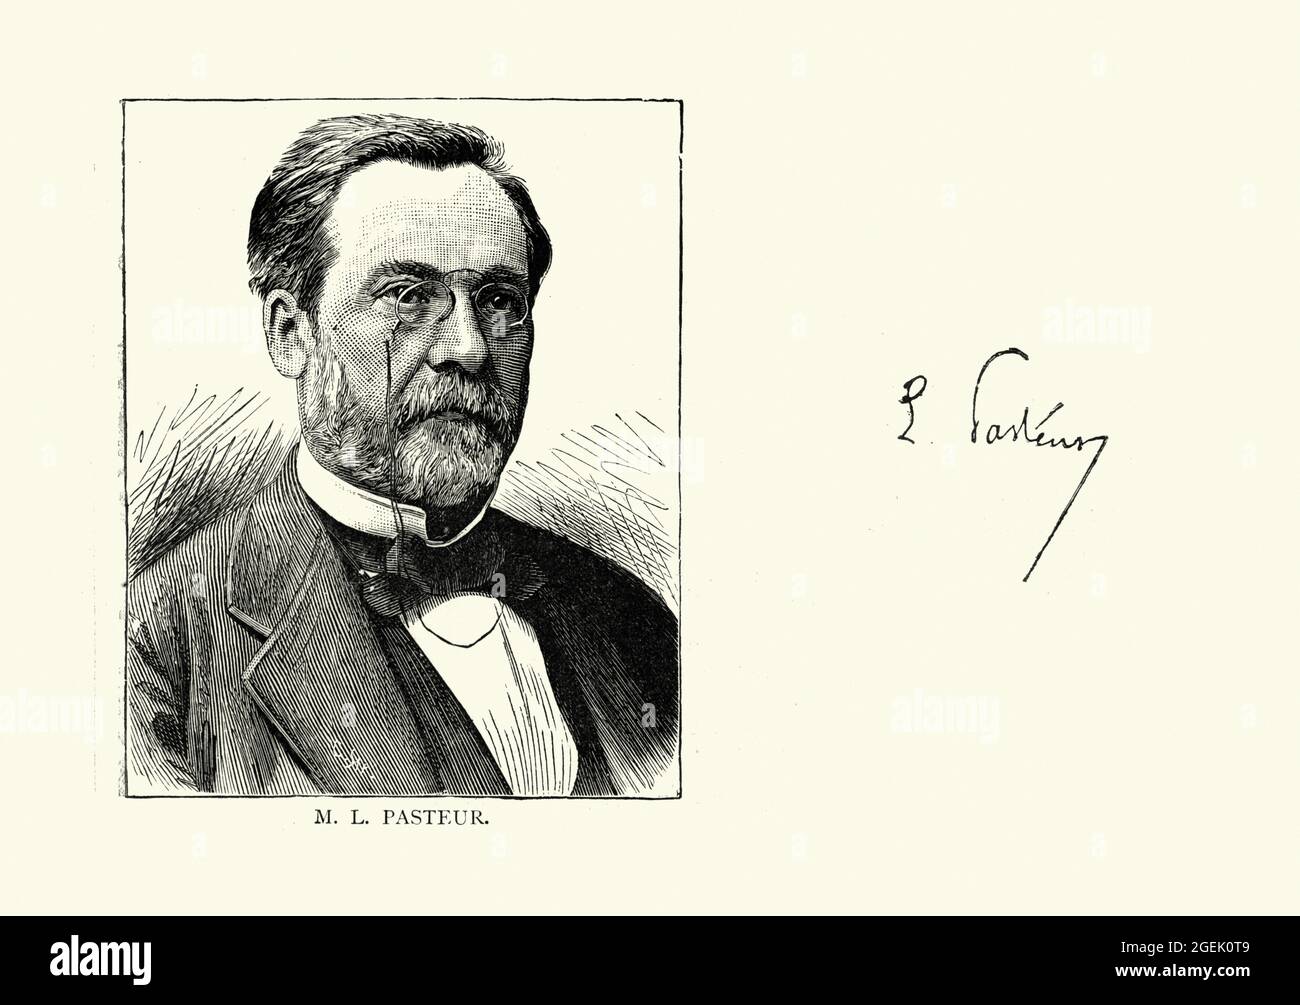 Louis Pasteur, French chemist and microbiologist renowned for his discoveries of the principles of vaccination, microbial fermentation, and pasteuriza Stock Photo